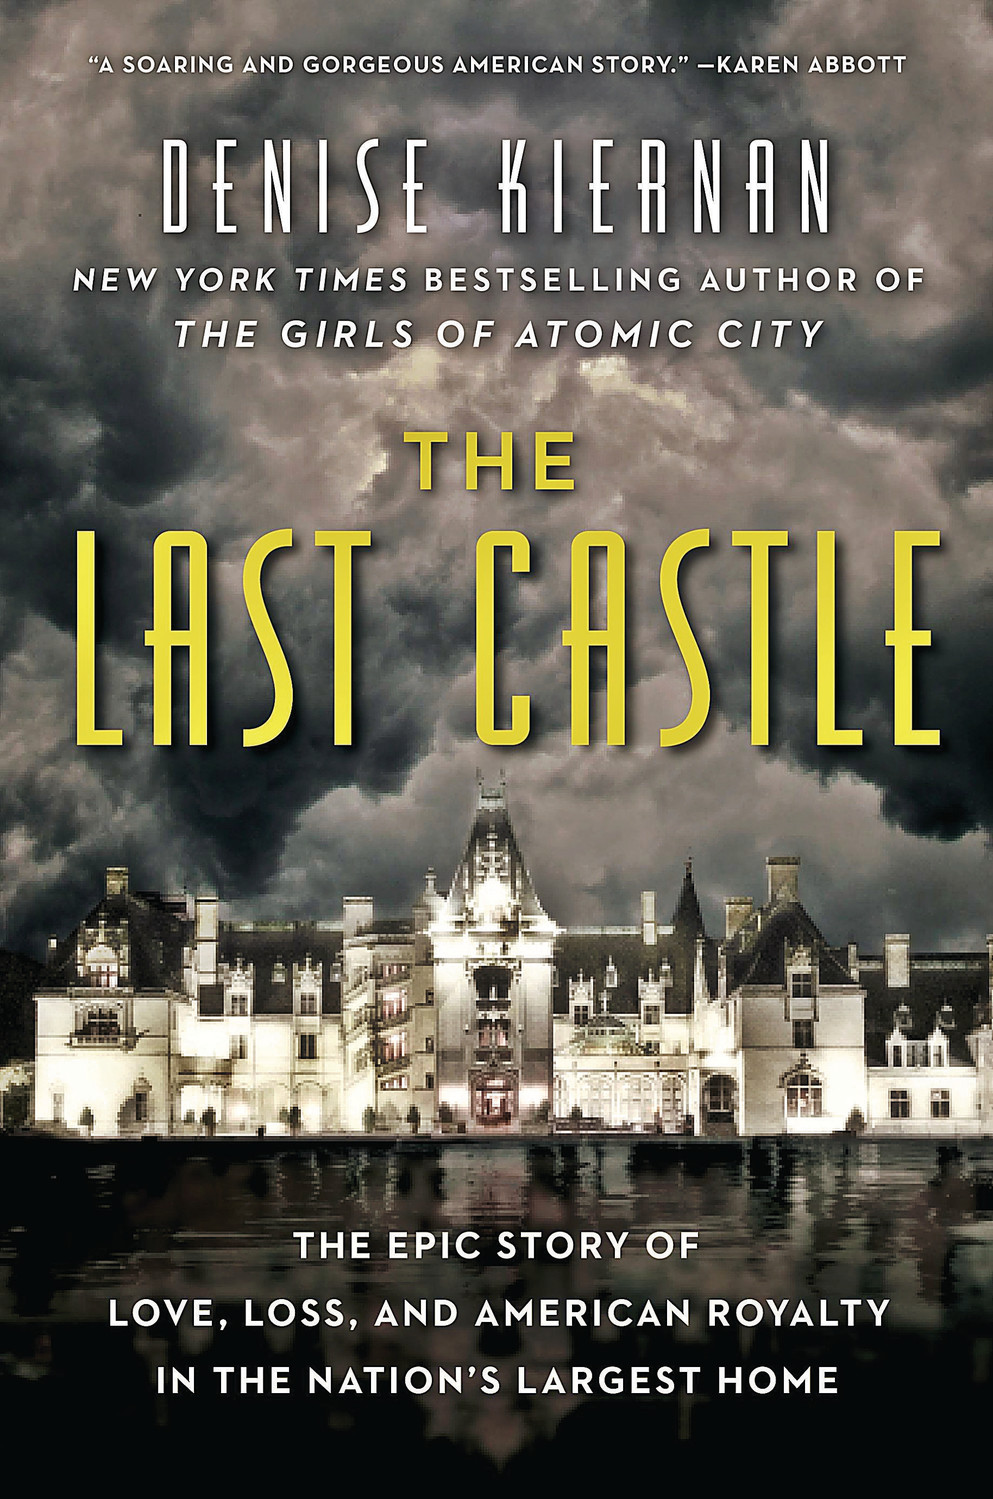 The Last Castle- The Epic Story of Love, Loss, and American Royalty in the Nation's Largest Home by denise kiernan.jpg